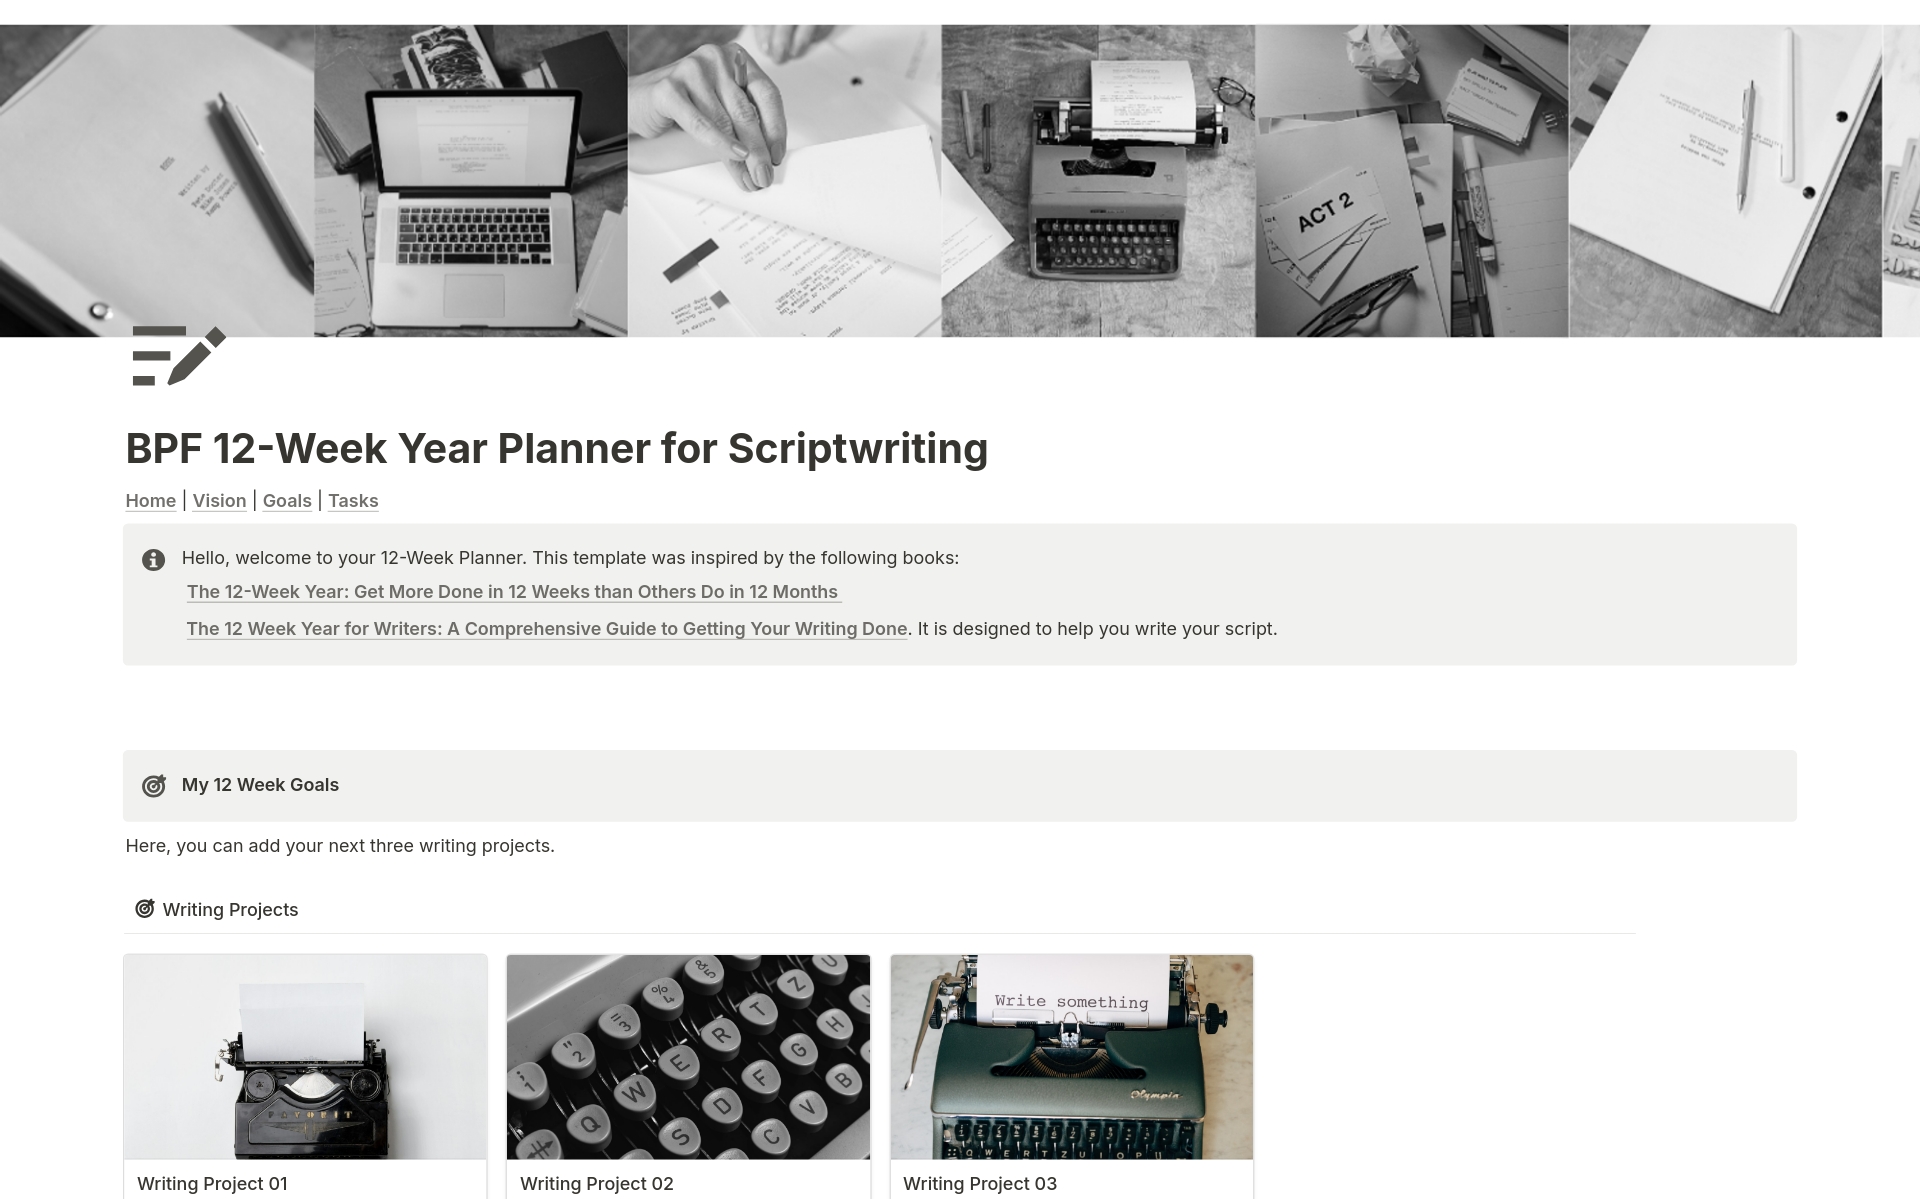 Introducing our comprehensive 12-week year Notion Template for Scriptwriting. Designed to streamline your writing process, this template empowers you to fulfill your writing projects within a short span of 12 weeks, using the proven 12-week year method.